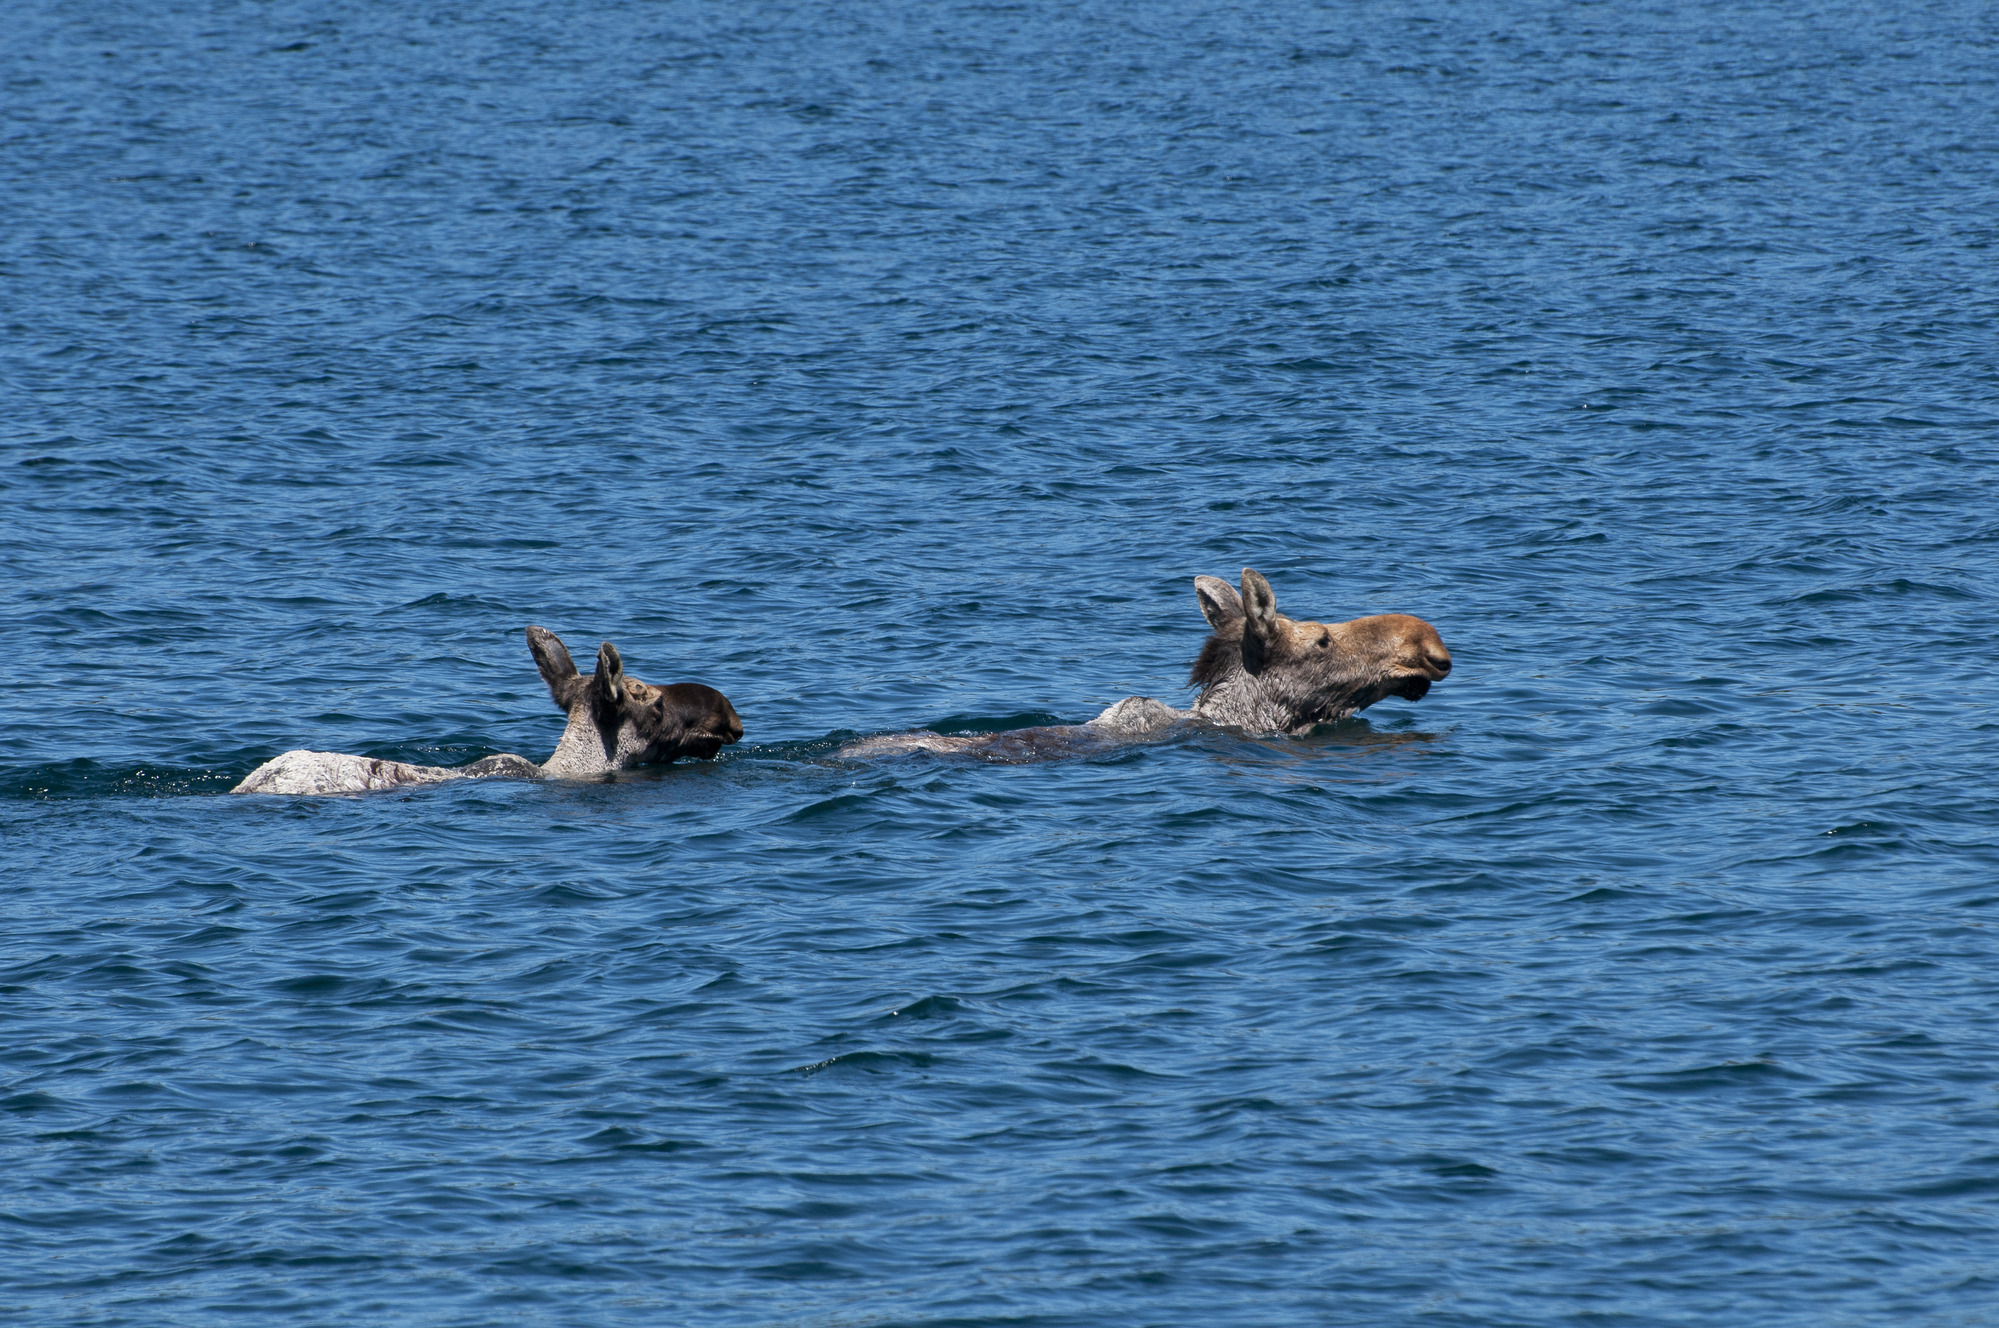 Cow moose swimming in front of her calf.